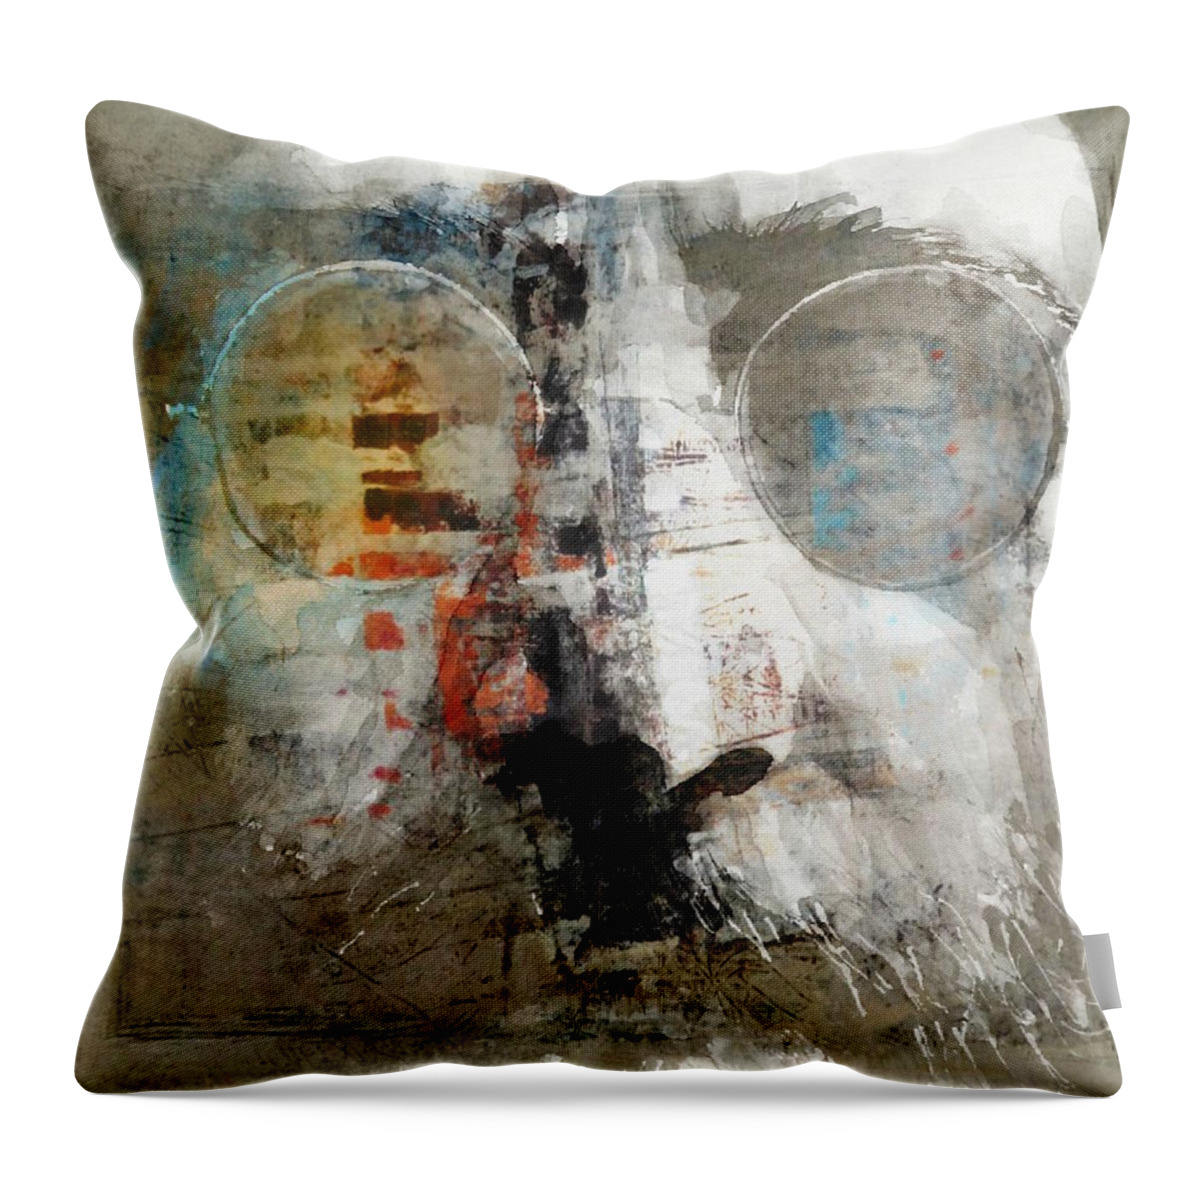 John Lennon Throw Pillow featuring the mixed media John Lennon - Out The Blue by Paul Lovering